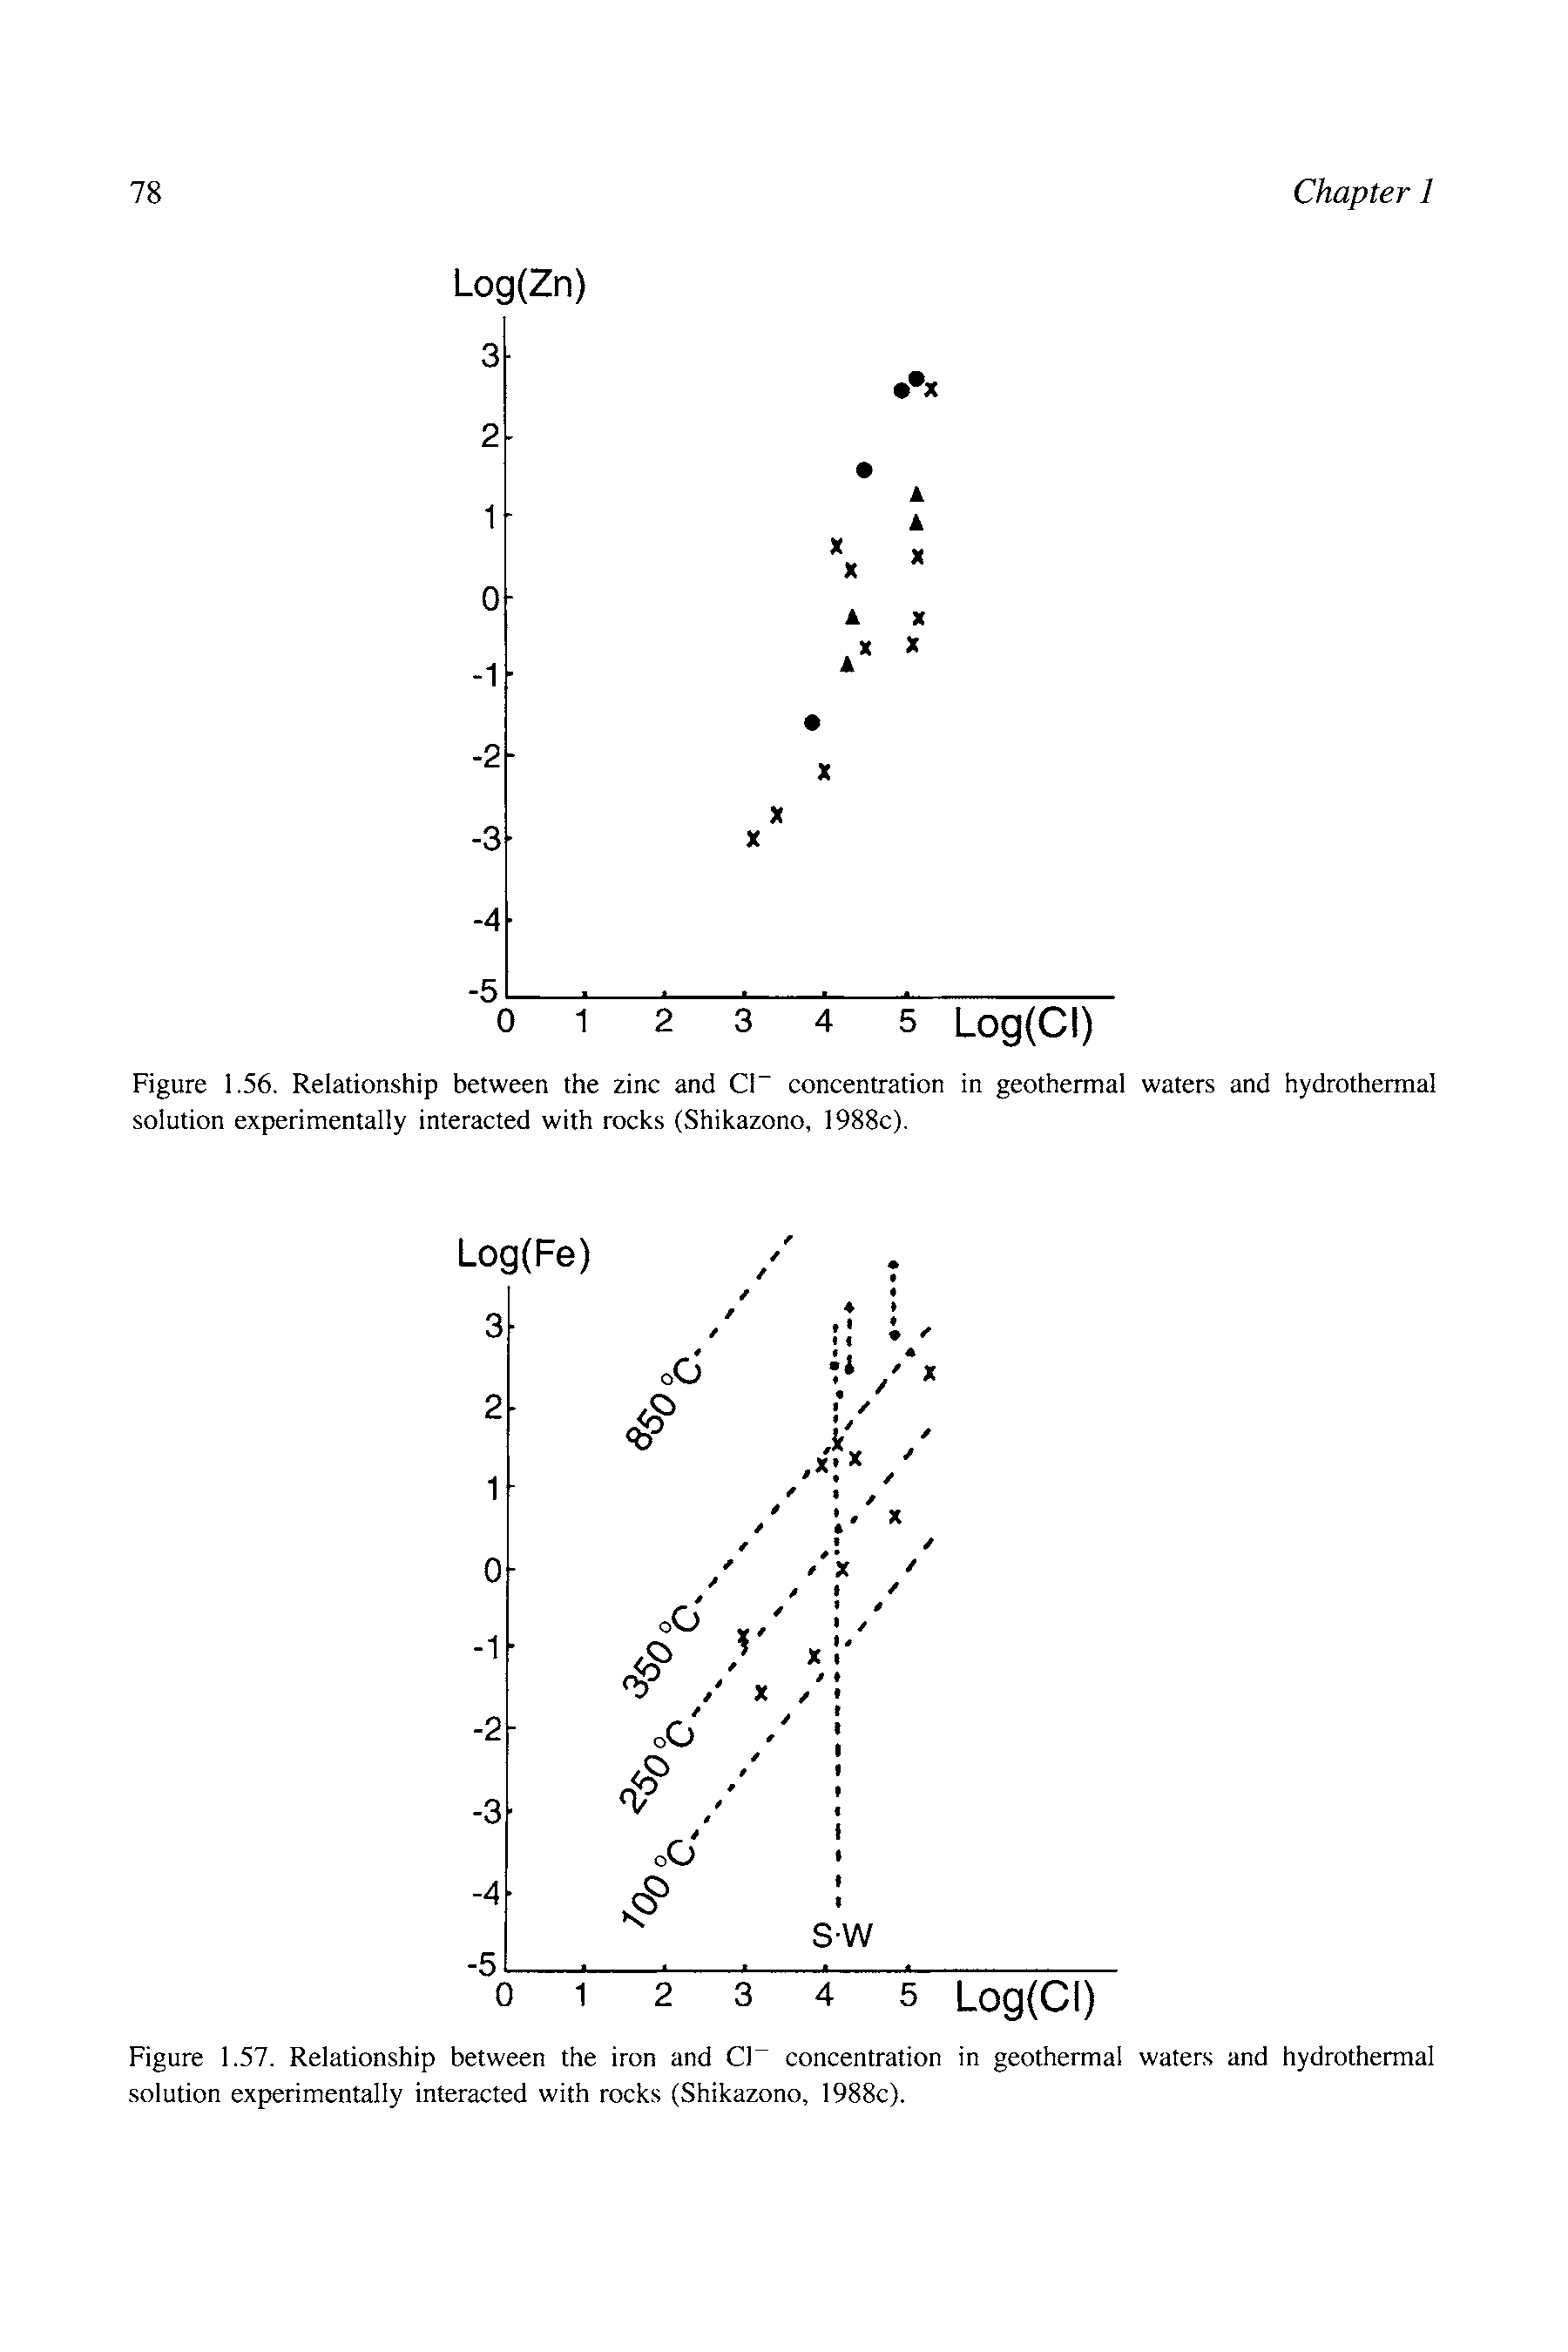 Figure 1.56. Relationship between the zinc and Cl concentration in geothermal waters and hydrothermal solution experimentally interacted with rocks (Shikazono, 1988c).